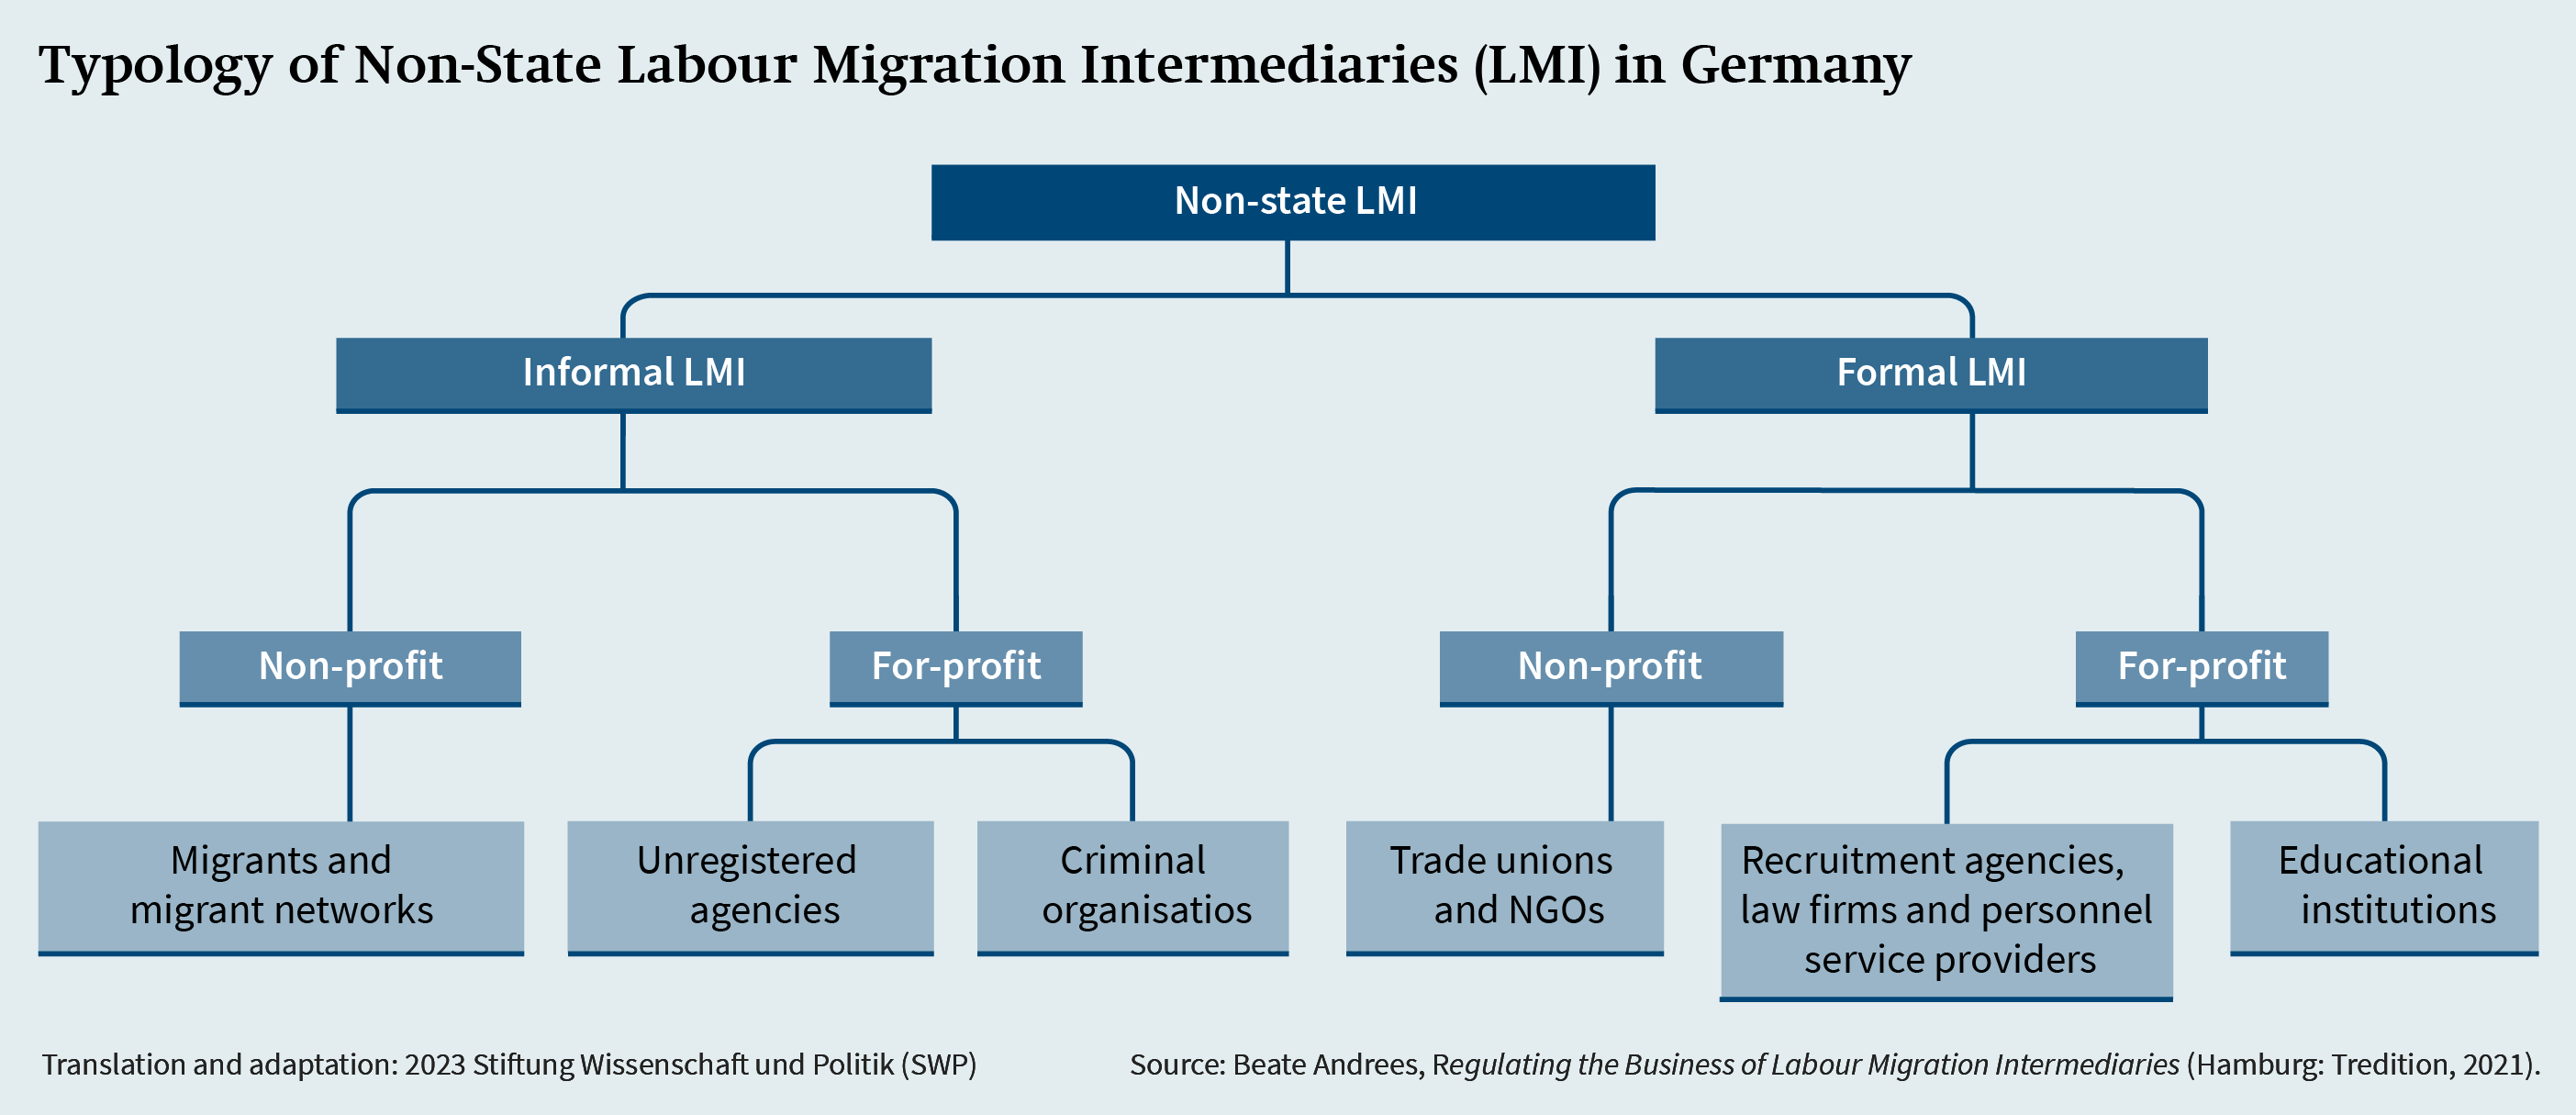 Figure 2: Typology of Non-State Labour Migration Intermediaries (LIM) in Germany